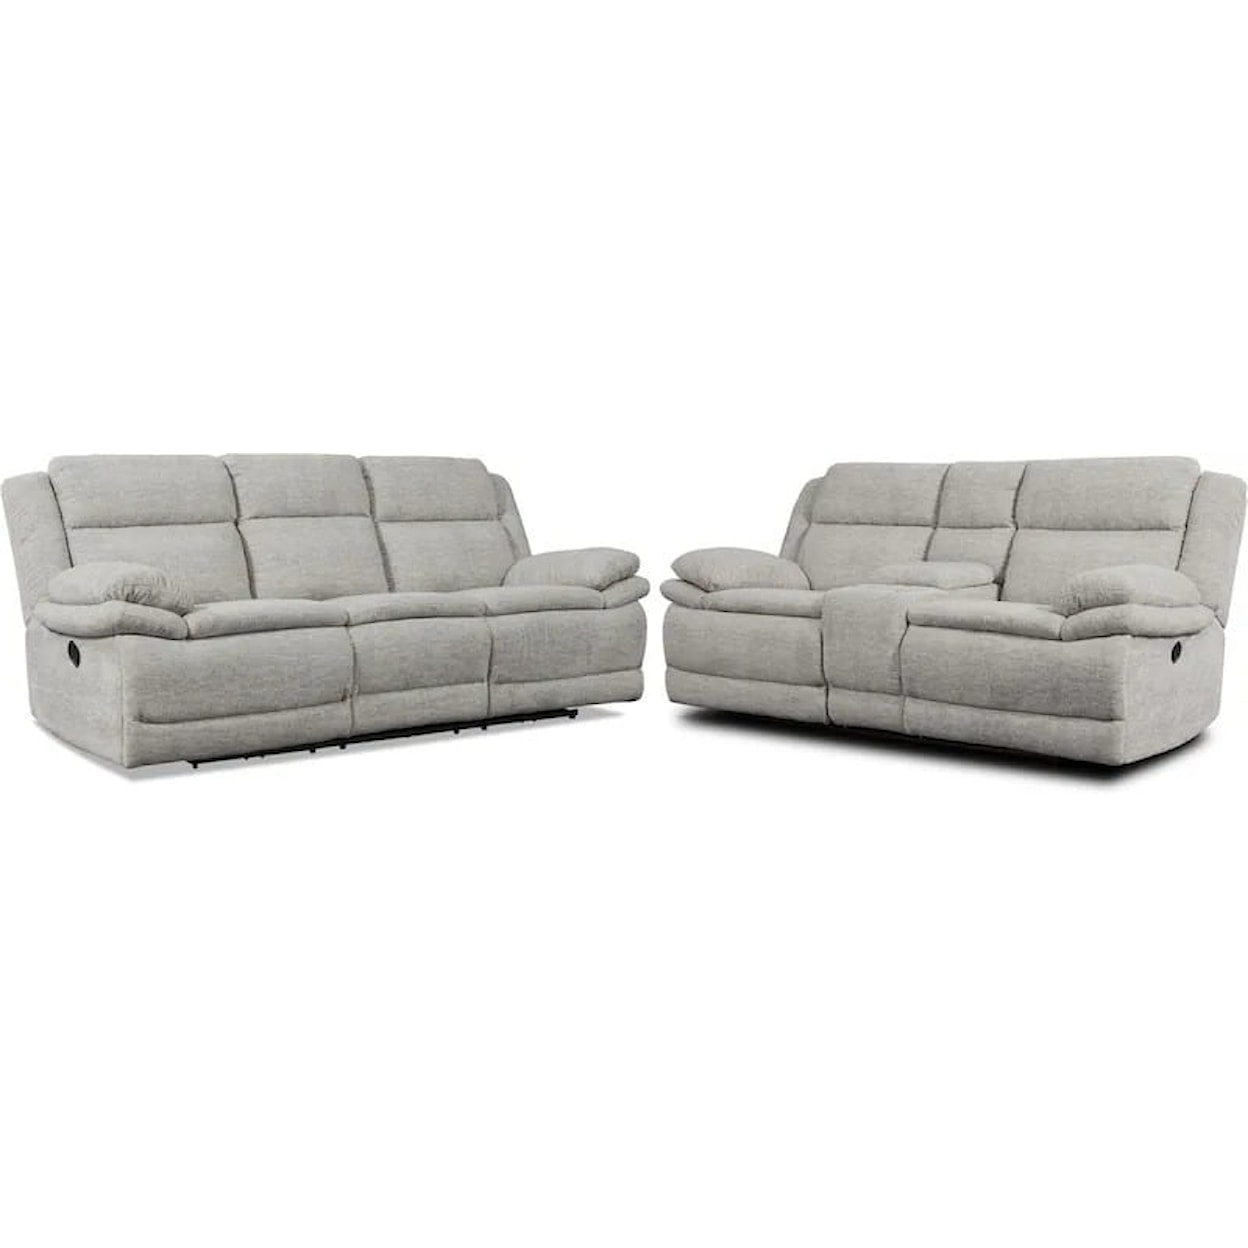 Stanbrook Home Pacific Pacific Reclining Sofa & Loveseat